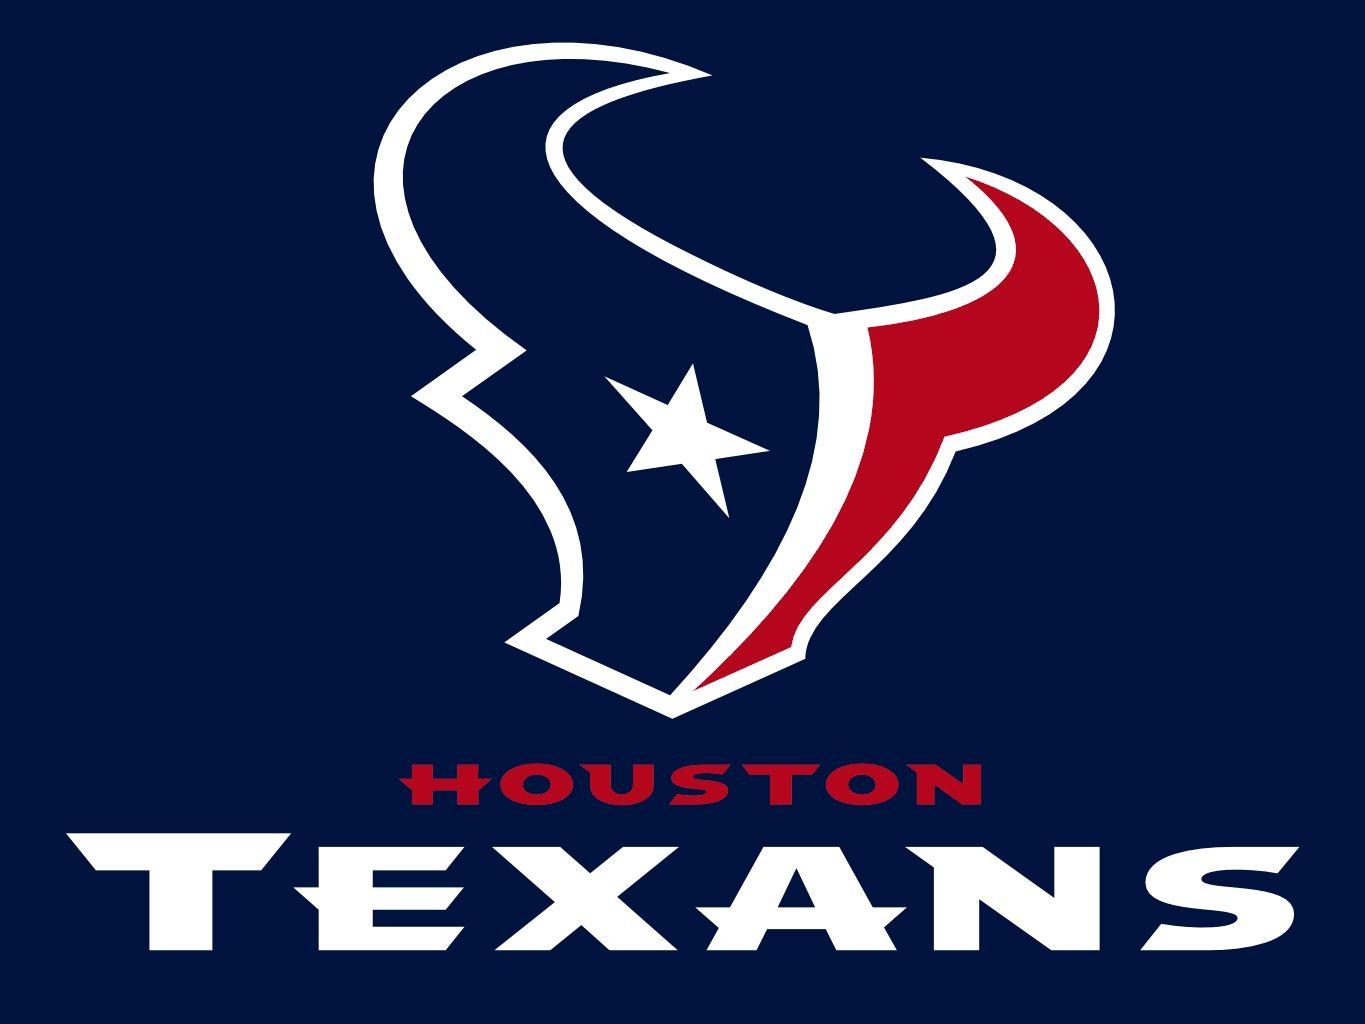 Houston Texans Live Stream 2016 2017: How To Watch The Texans Online